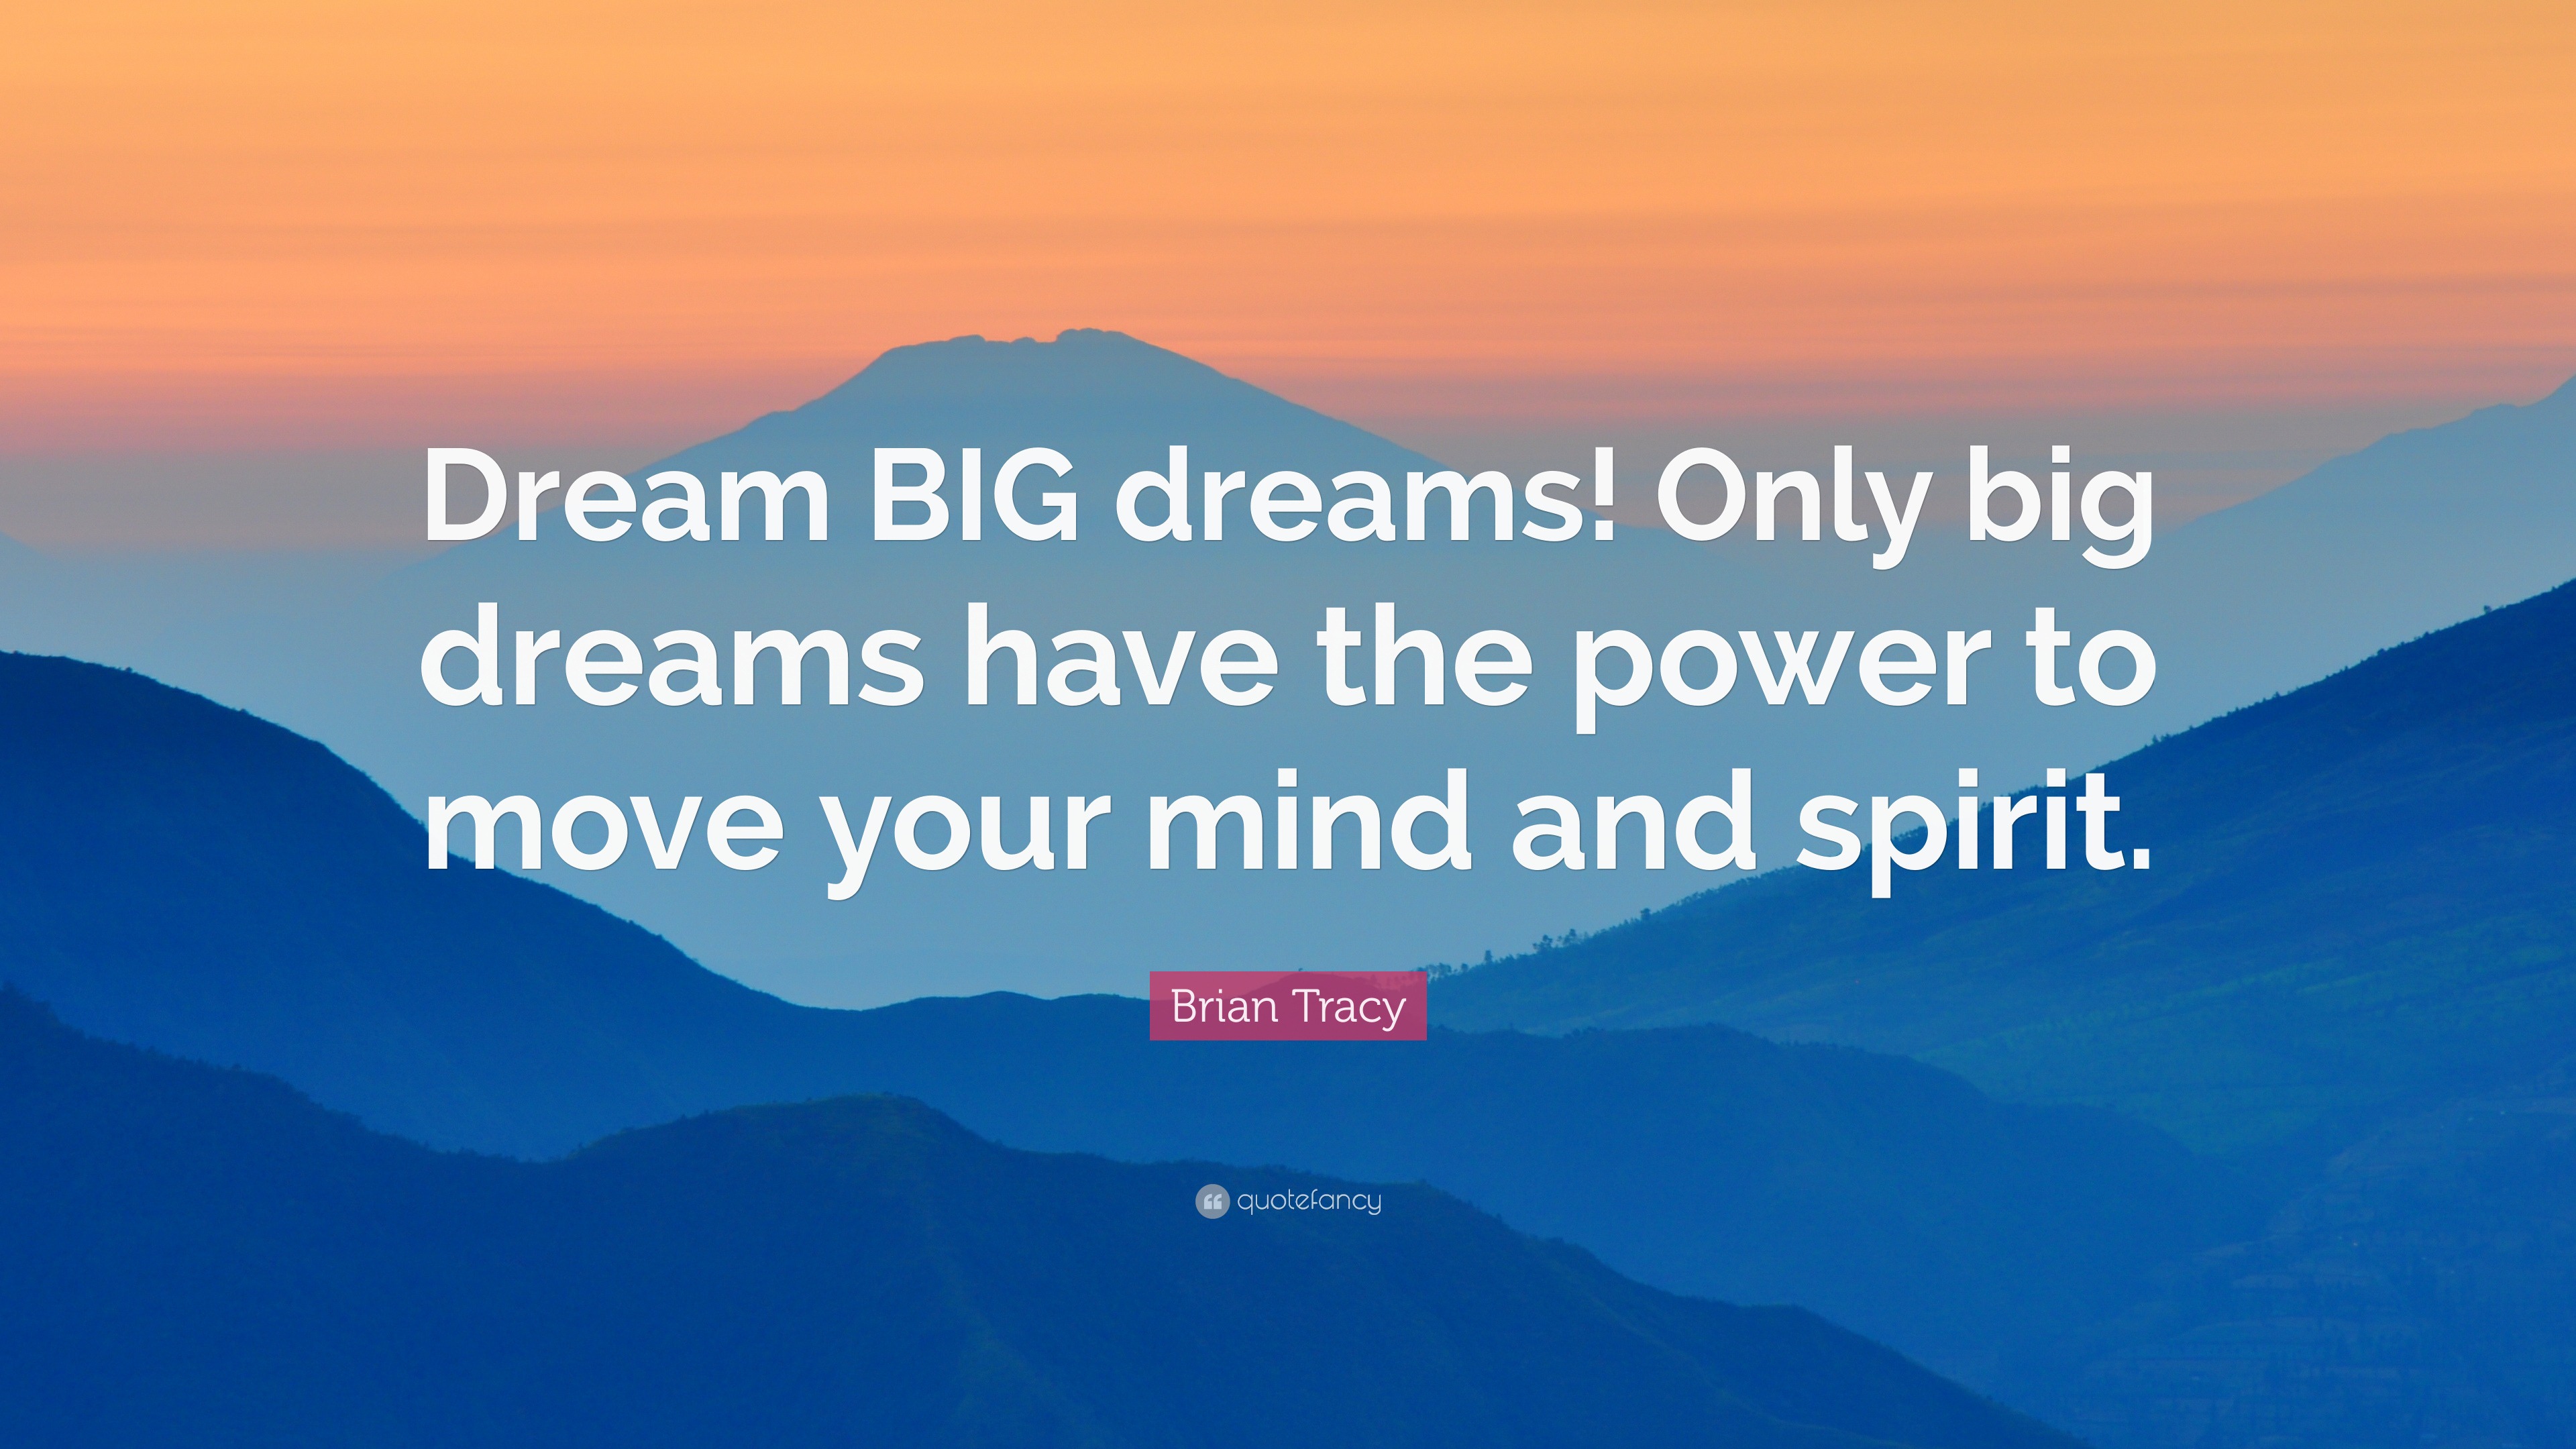 Brian Tracy Quote: “Dream BIG dreams! Only big dreams have the power to ...
